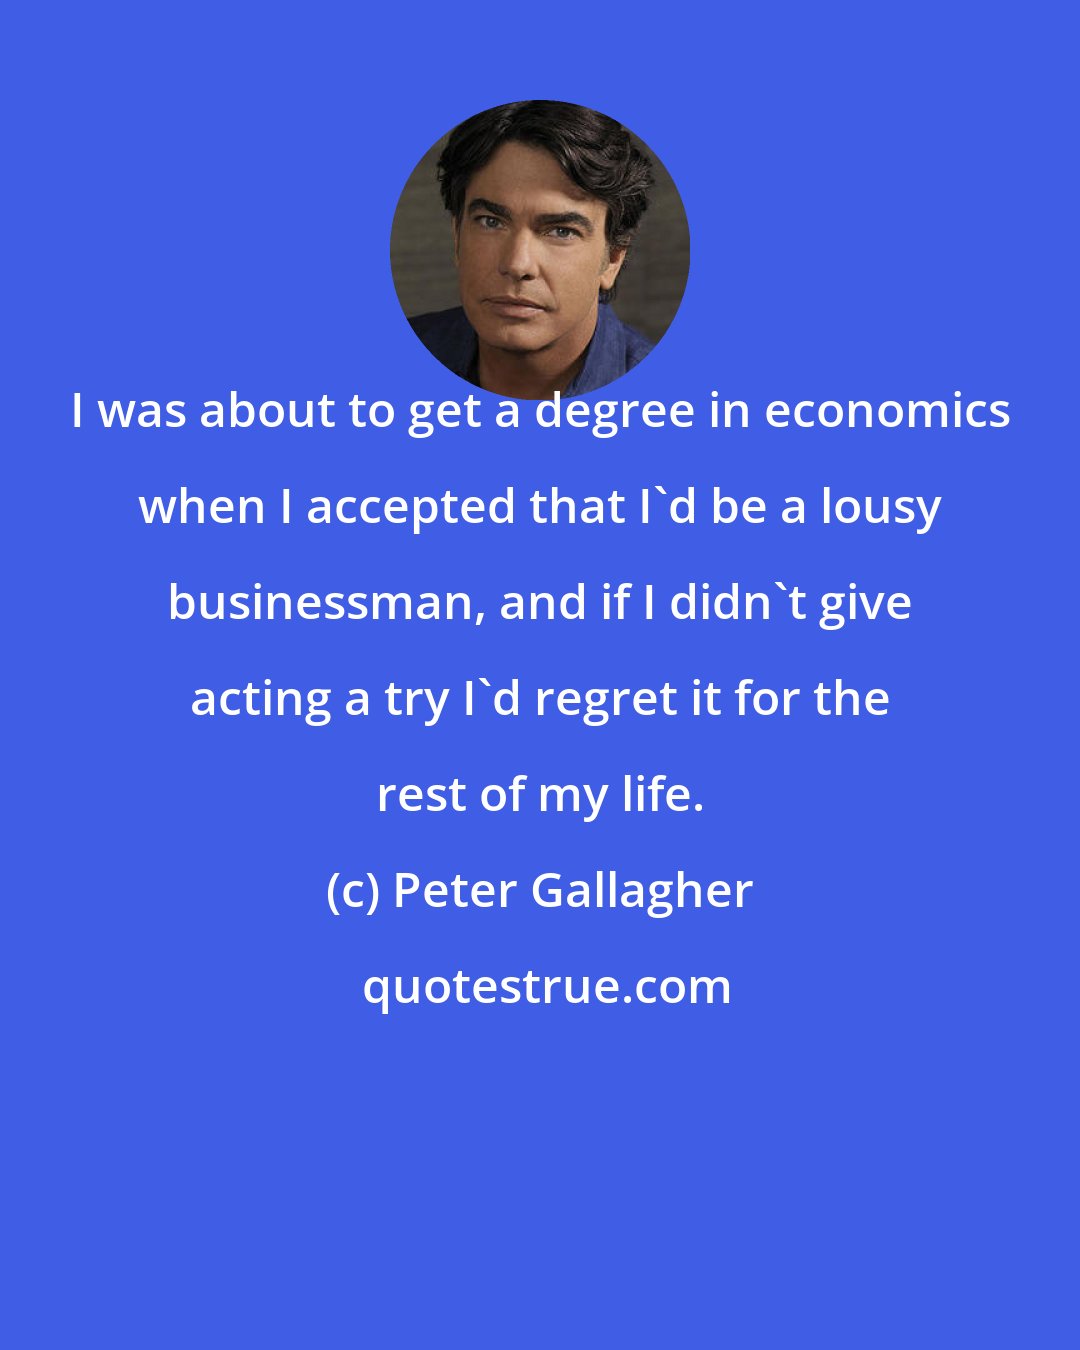 Peter Gallagher: I was about to get a degree in economics when I accepted that I'd be a lousy businessman, and if I didn't give acting a try I'd regret it for the rest of my life.